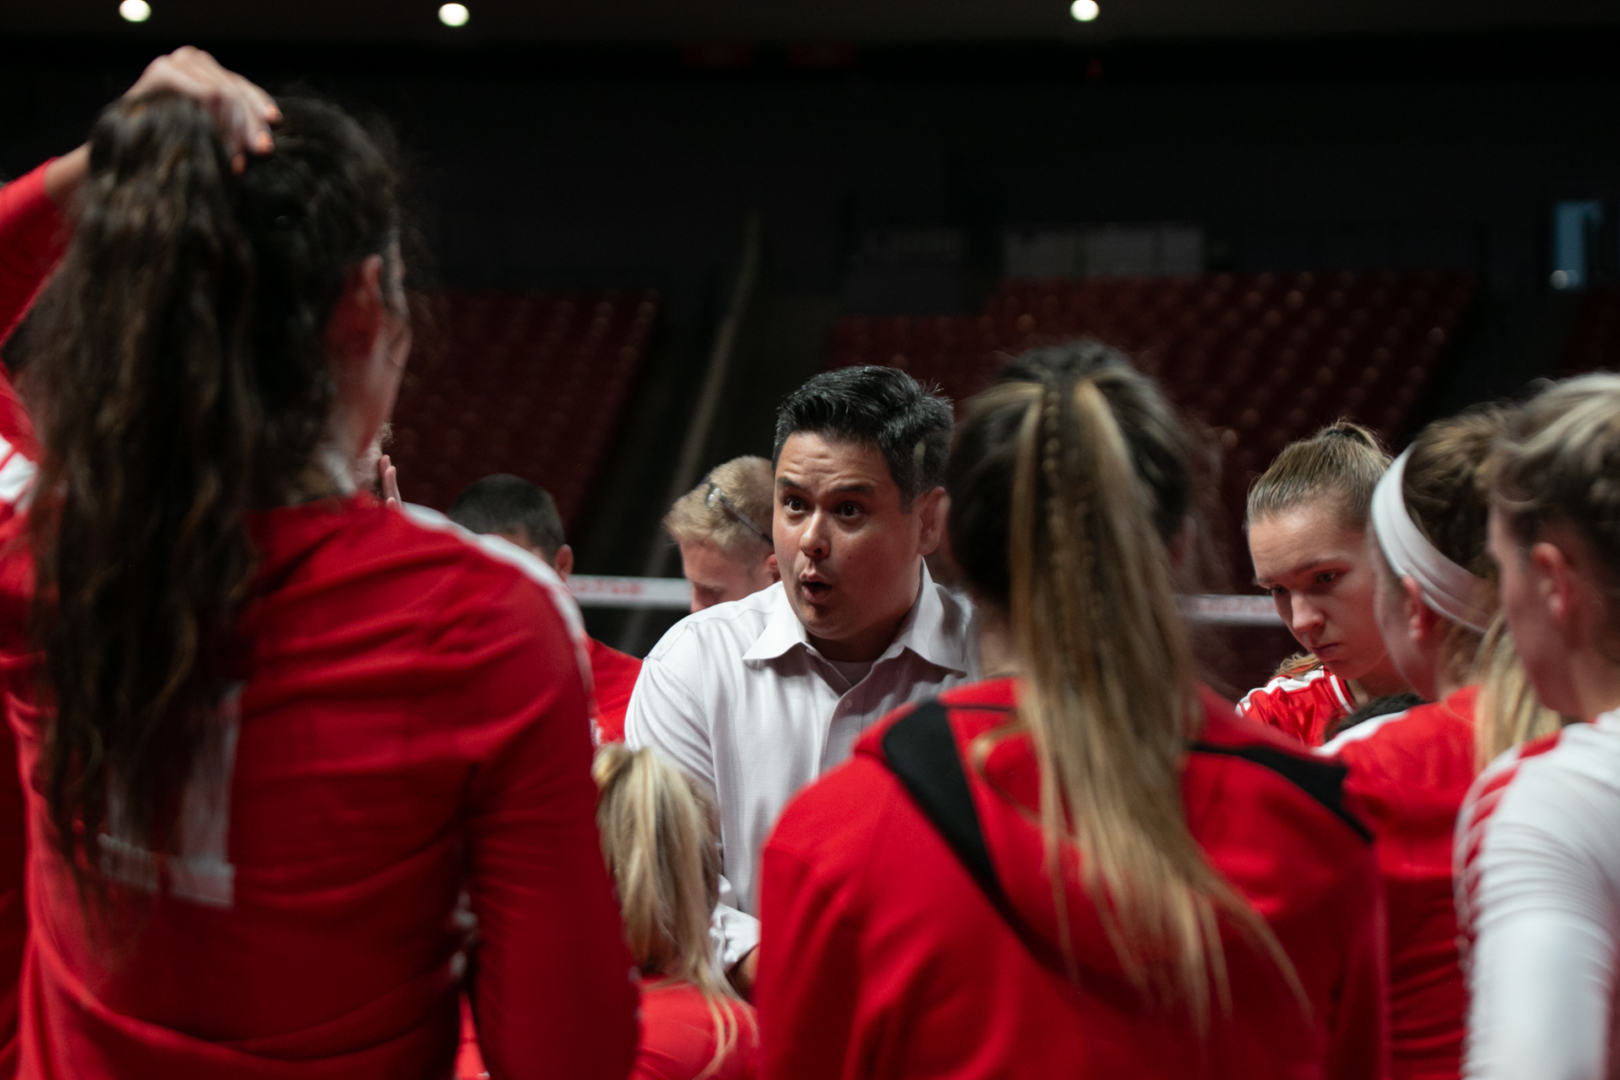 Head coach David Rehr turned a program down in the dumps into an American Athletic Conference contender, but he and the Cougars are still aiming for the national spotlight. | Kathryn Lenihan/The Cougar